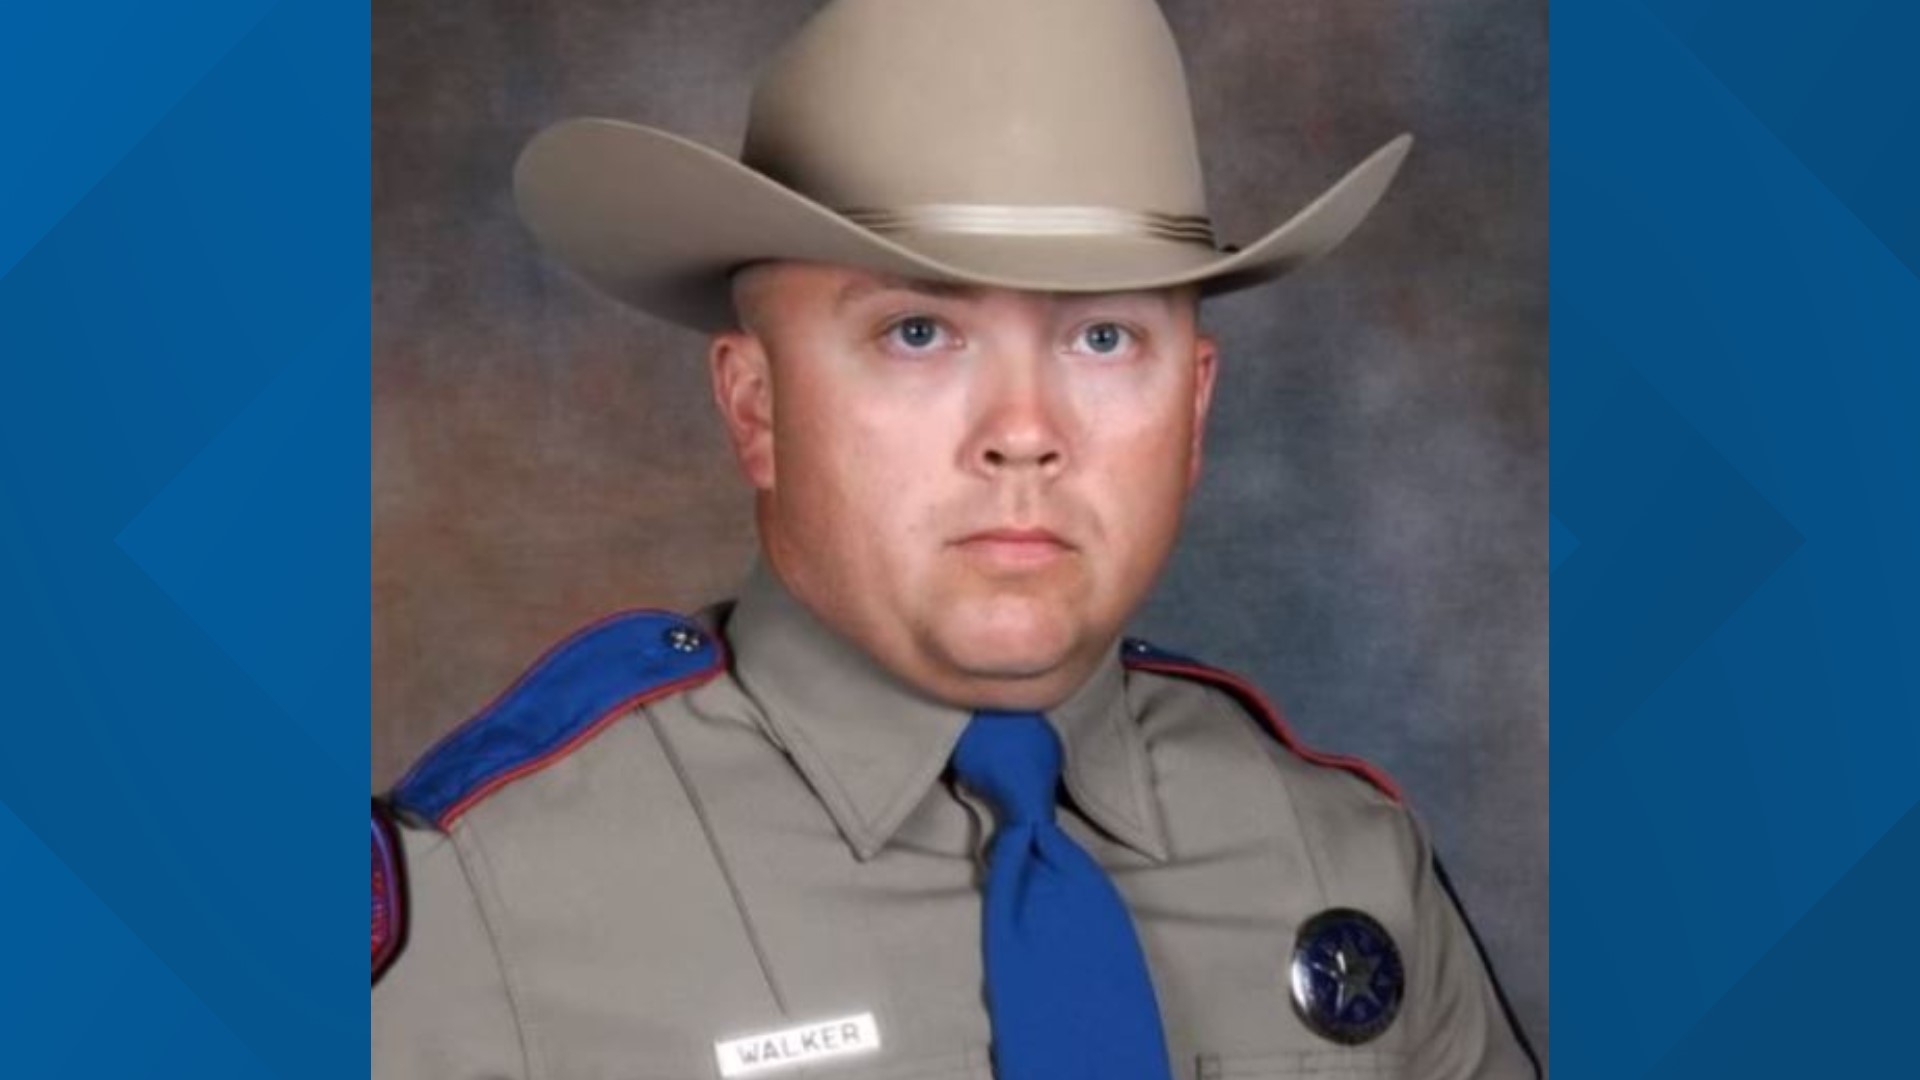 Walker was shot in the head while responding to a call about a disabled vehicle on Hwy 84 by the suspect inside the vehicle, the Texas DPS Officers Association said.